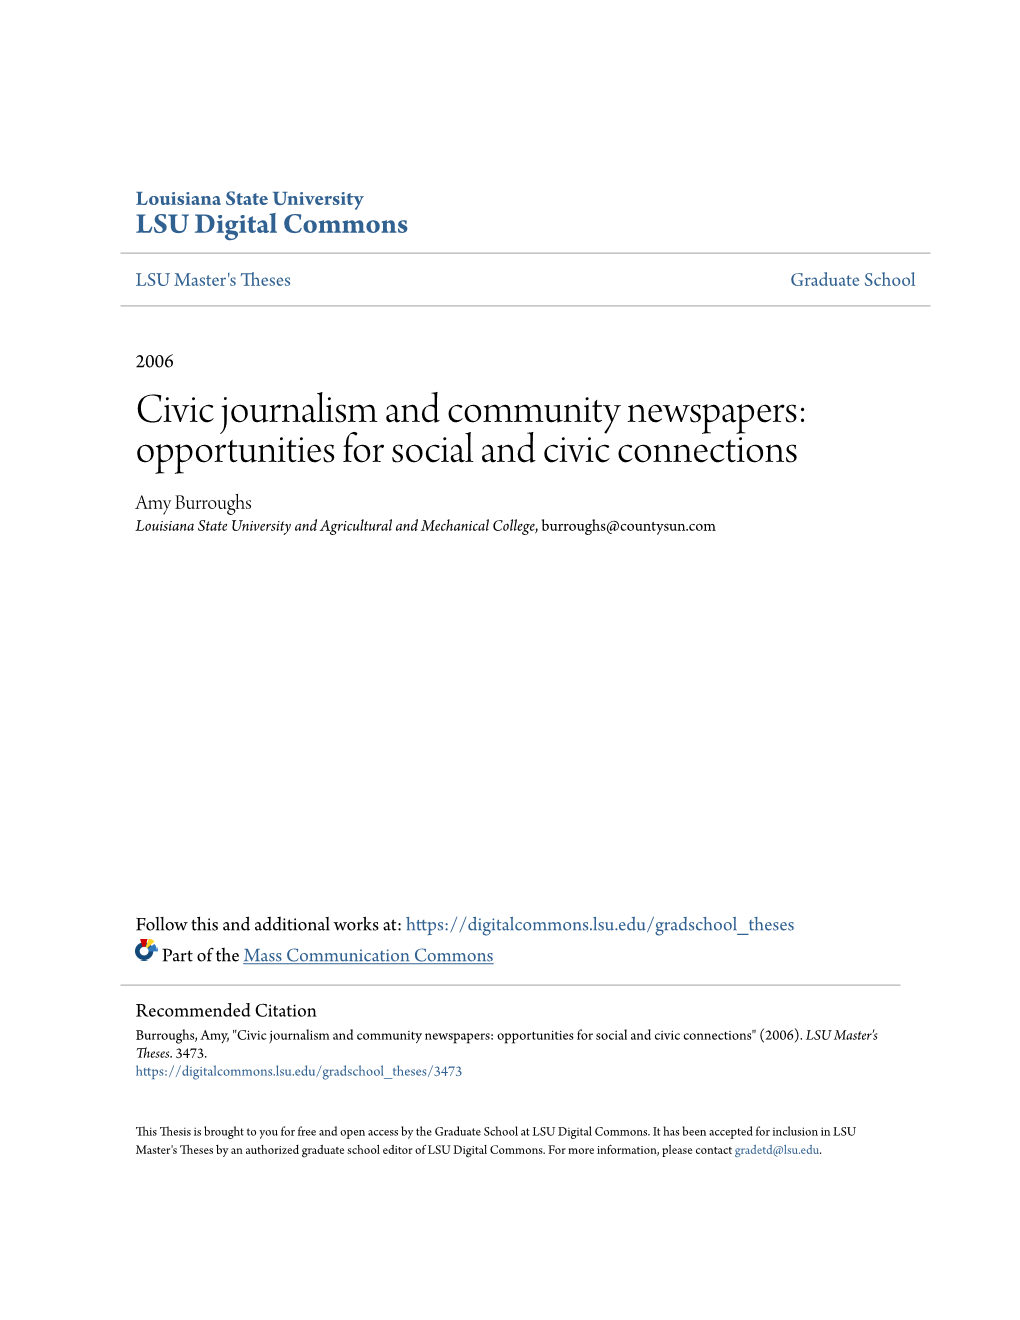 Civic Journalism and Community Newspapers